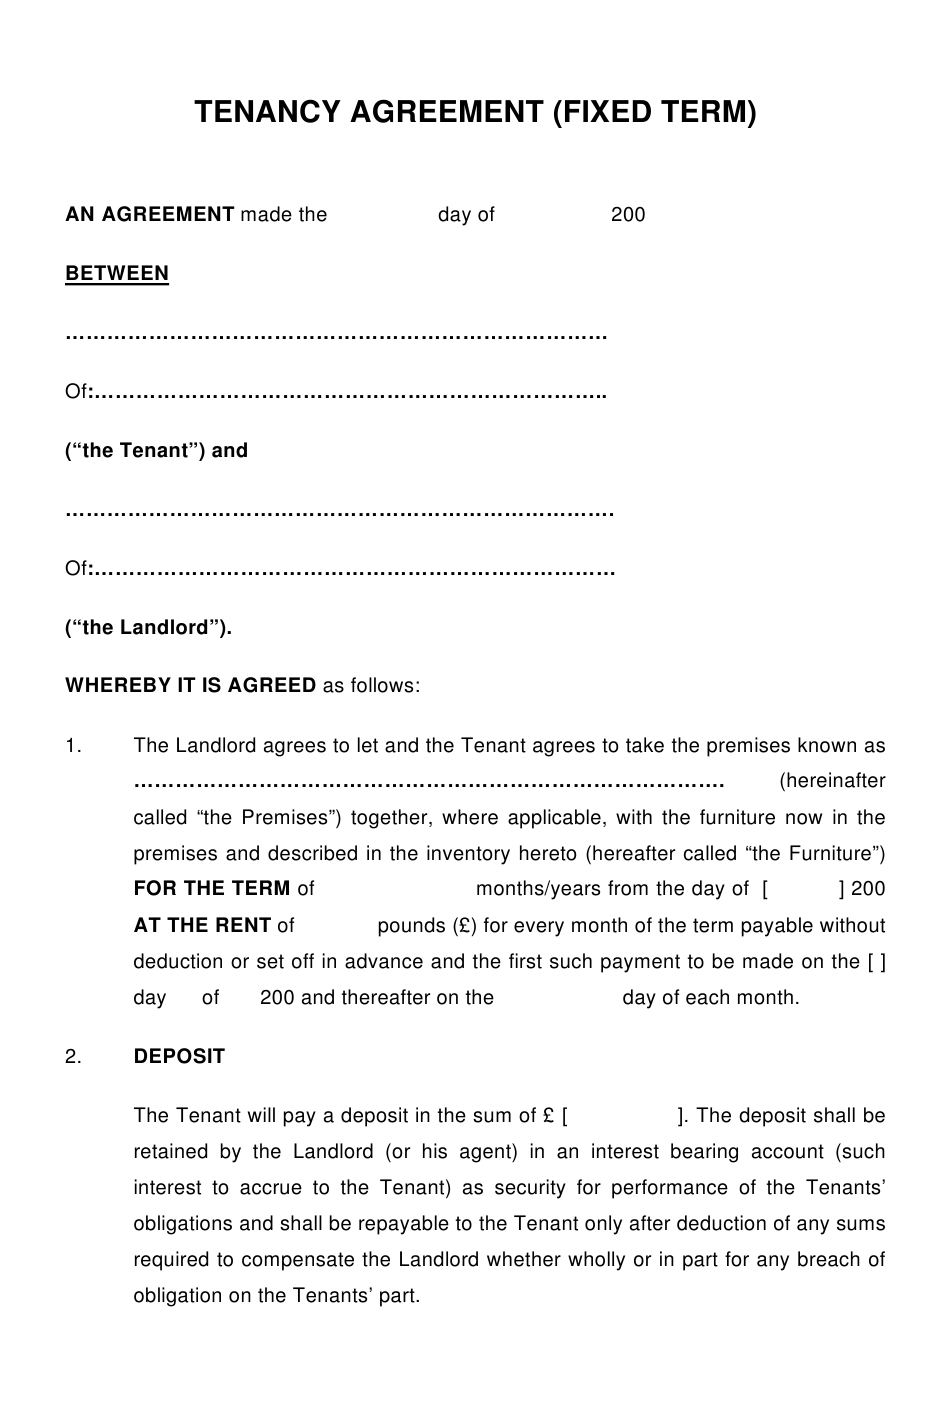 United Kingdom Tenancy Agreement Template Fixed Term Download 